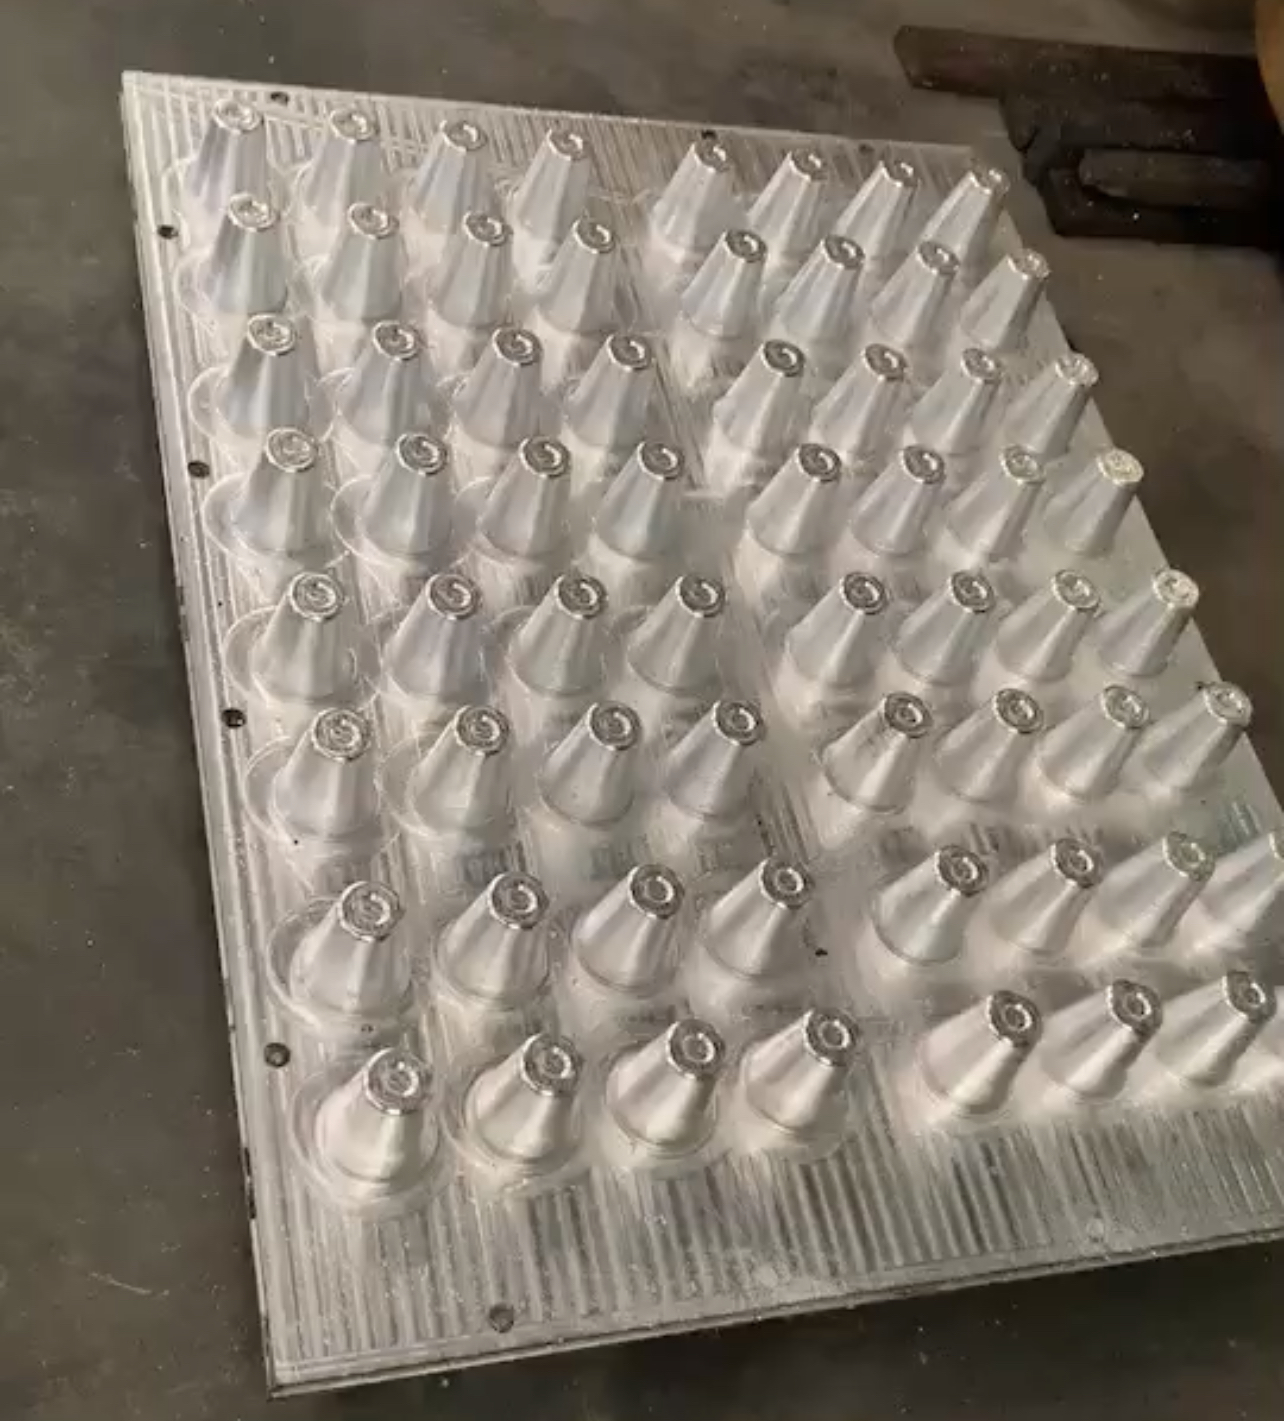 Product mold